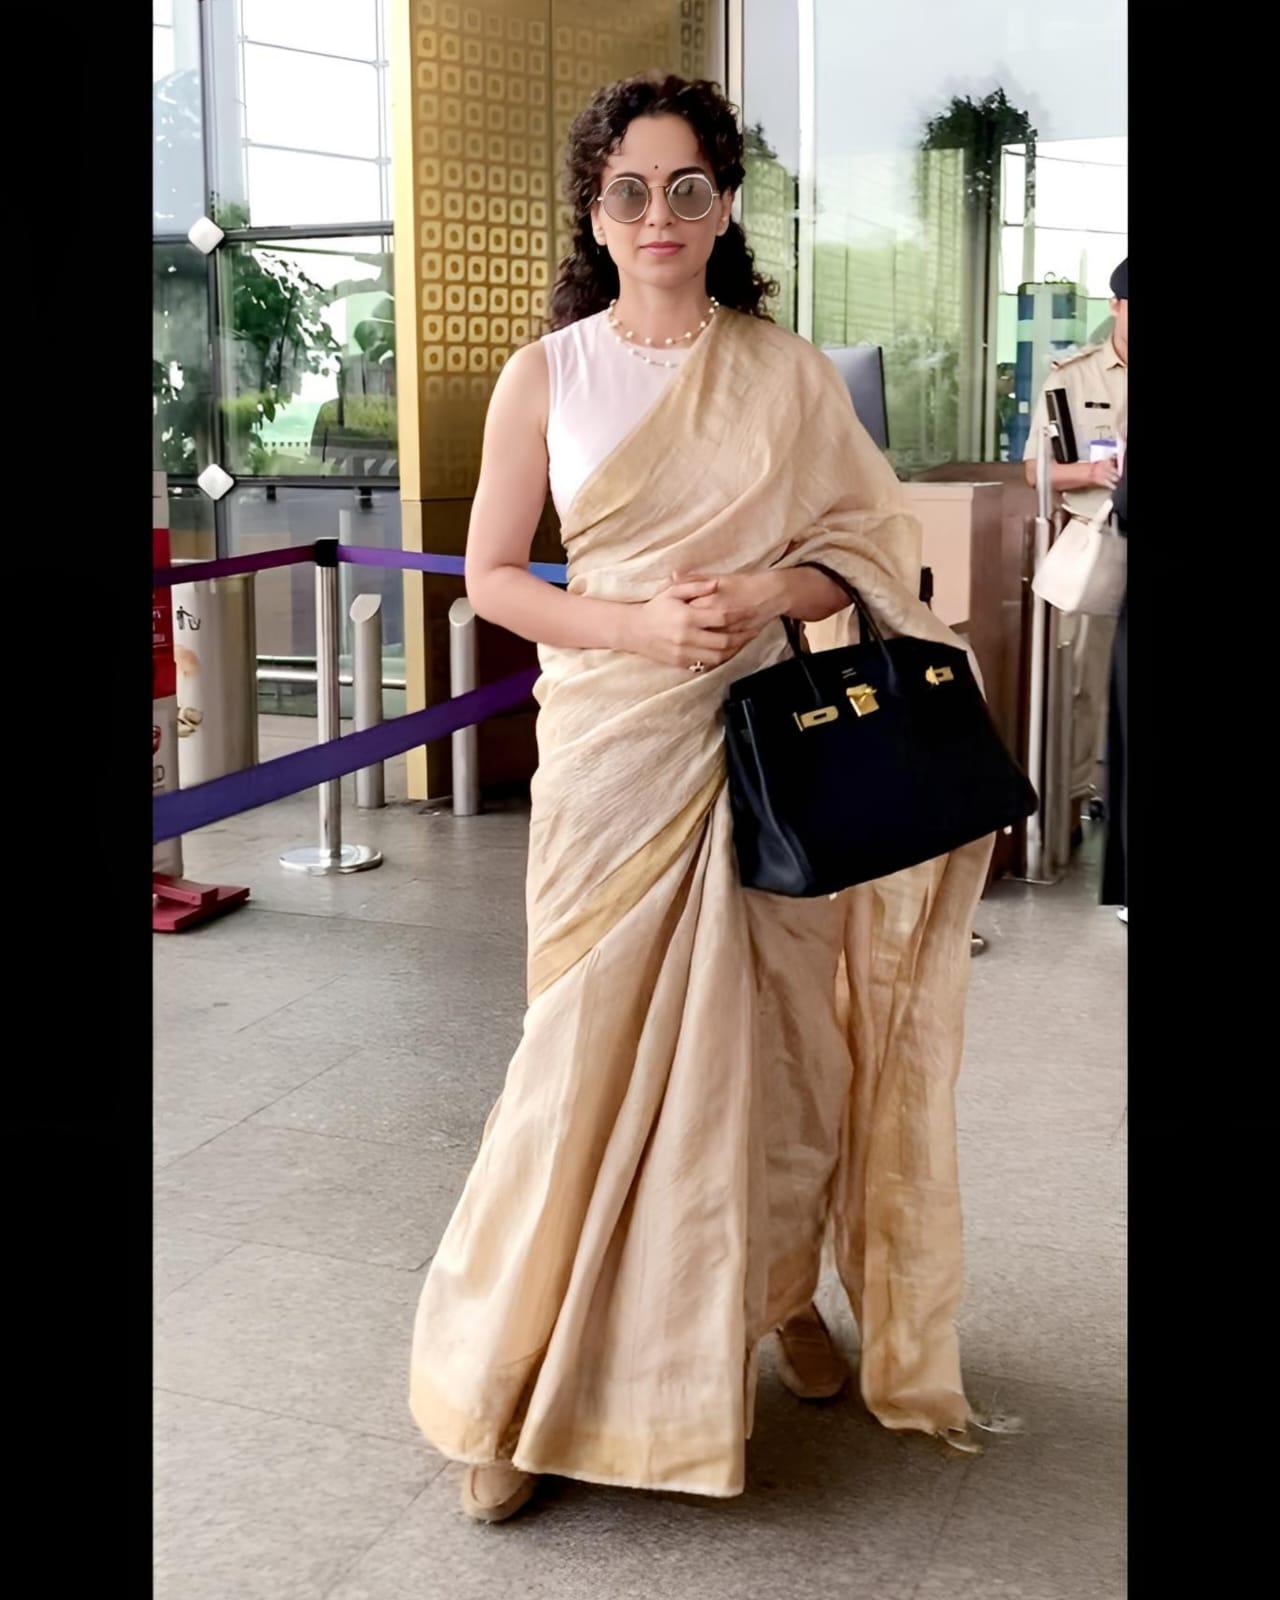 Kangana Ranaut exuded elegance in a cream saree during her recent airport appearance.